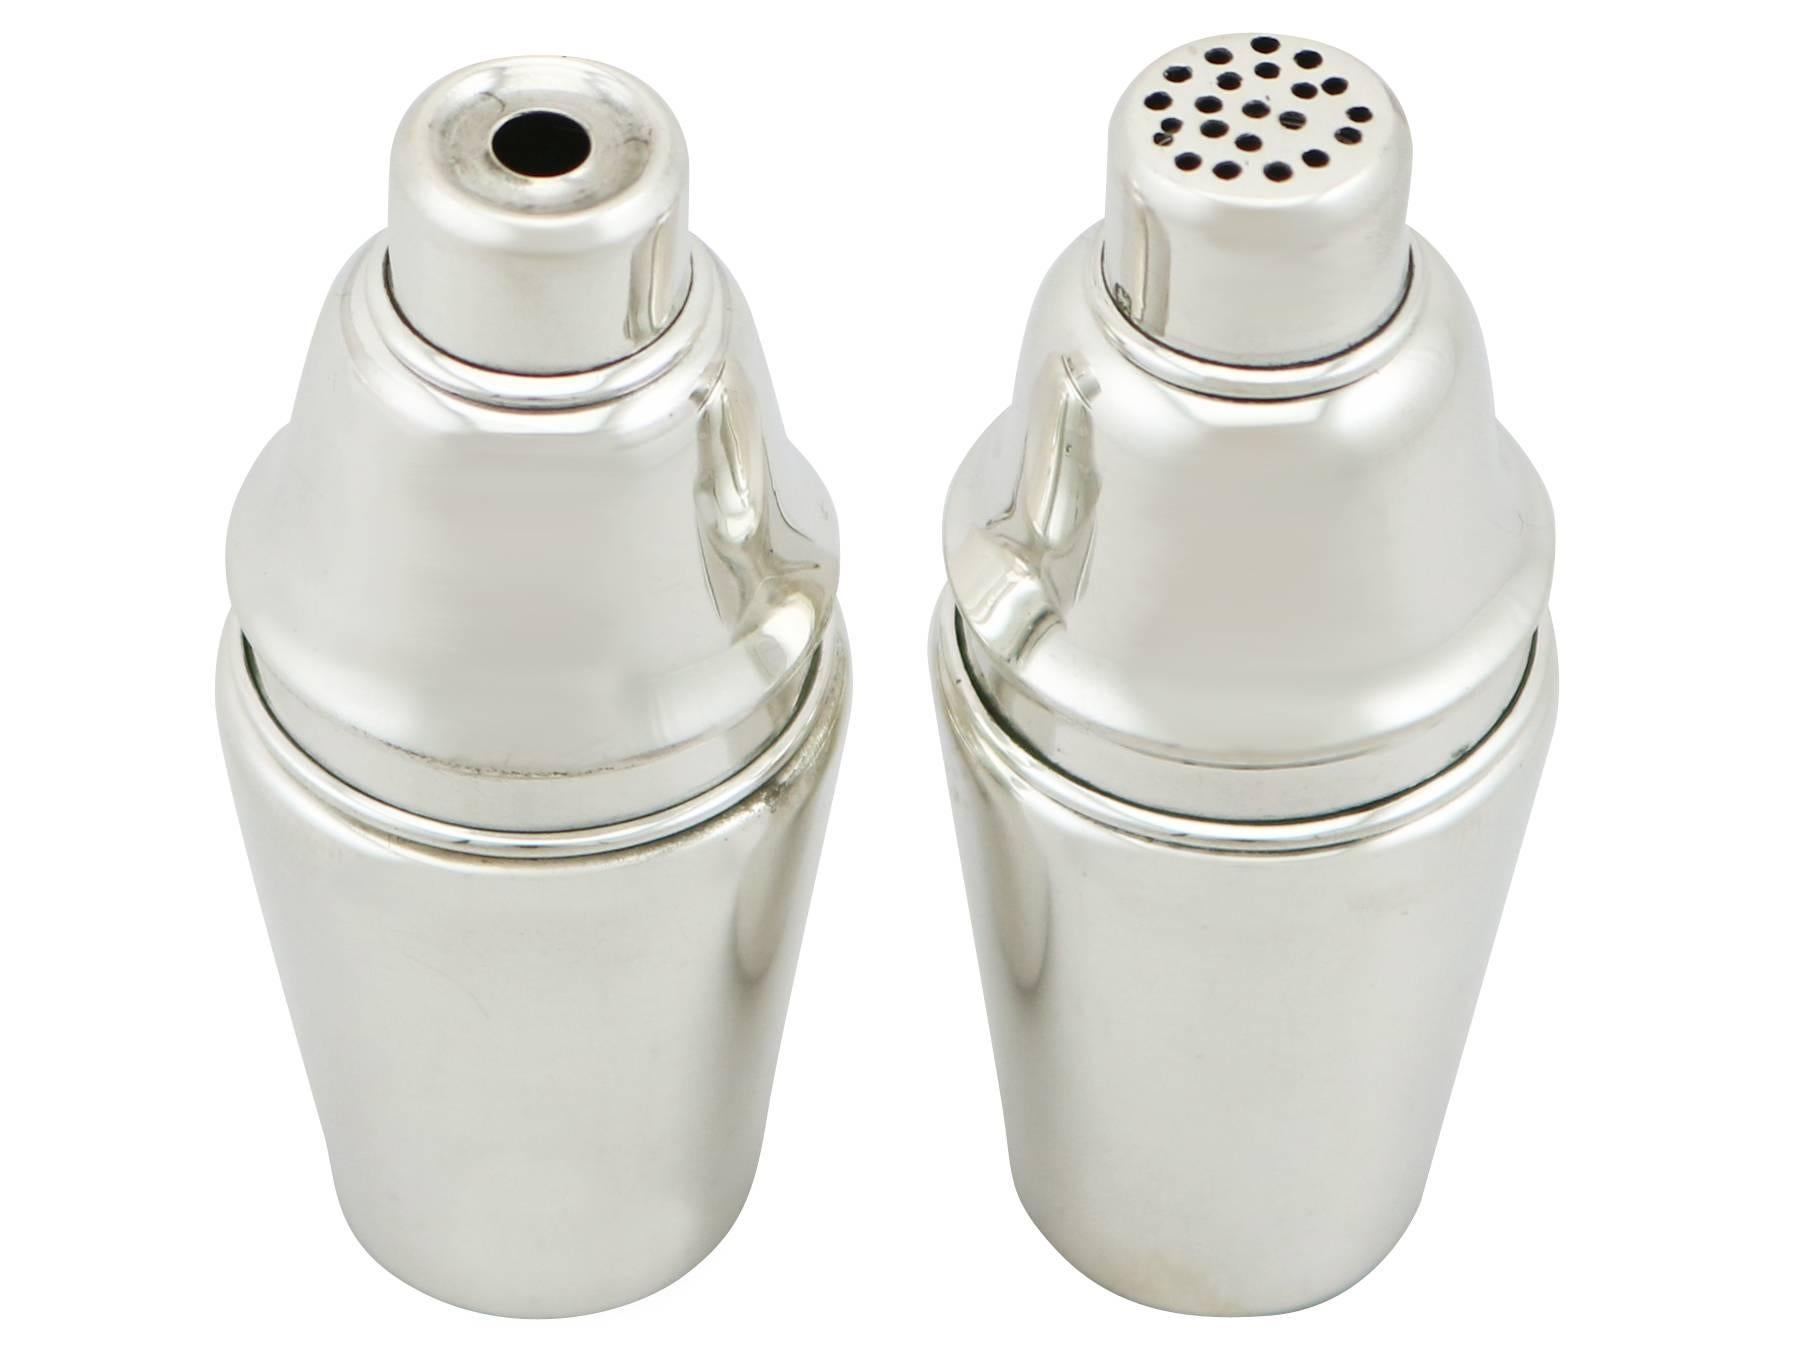 An exceptional, fine and impressive pair of antique George V English sterling silver salt and pepper shakers; an addition to our silver cruets/condiments collection.

These fine antique George V sterling silver salt and pepper shakers are